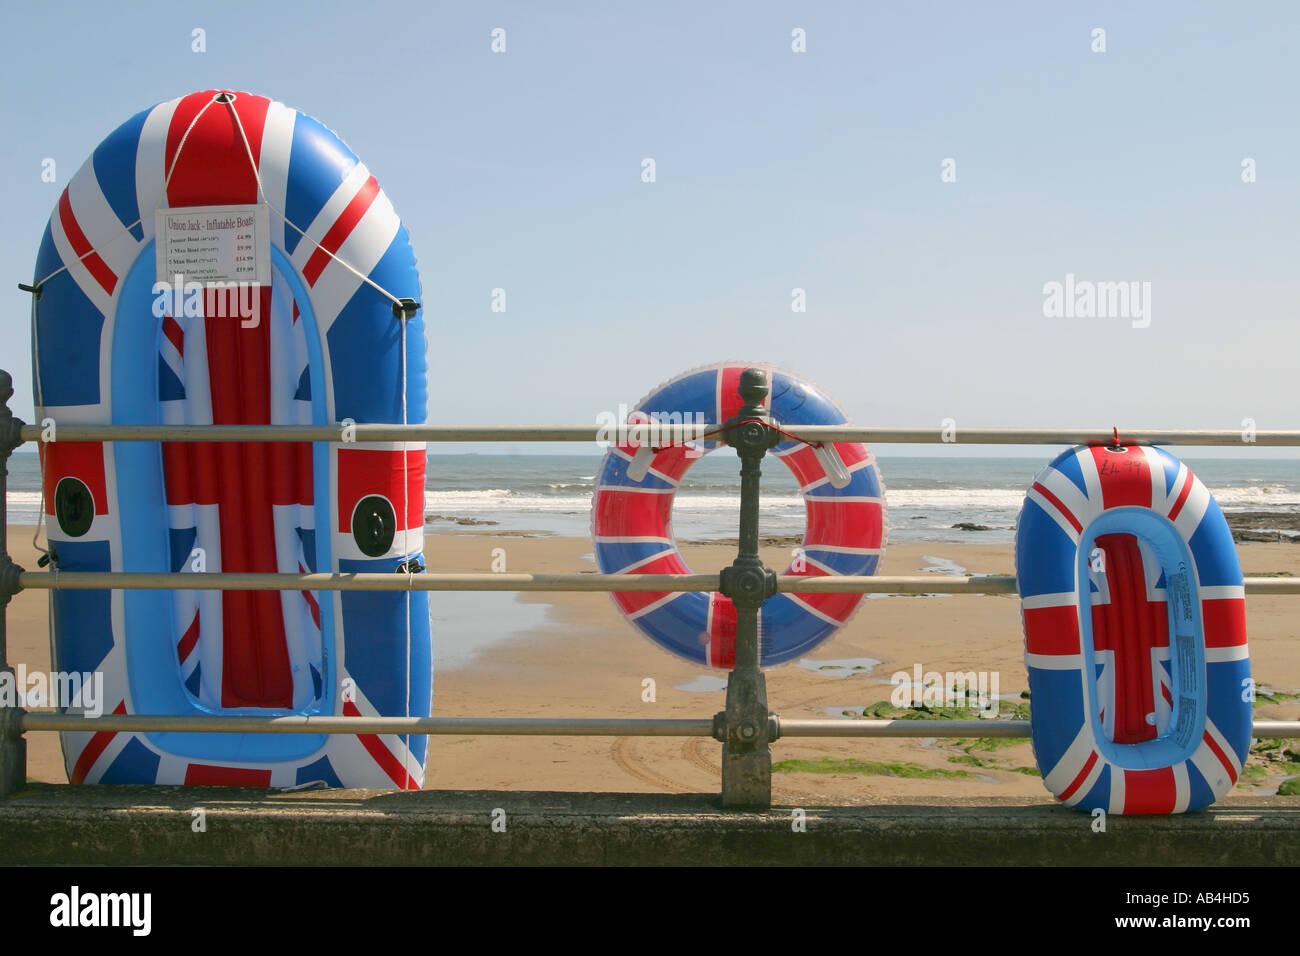 Inflatable dinghies and swimming-ring for sale on the seafront in Scarborough, Yorkshire, UK. Stock Photo